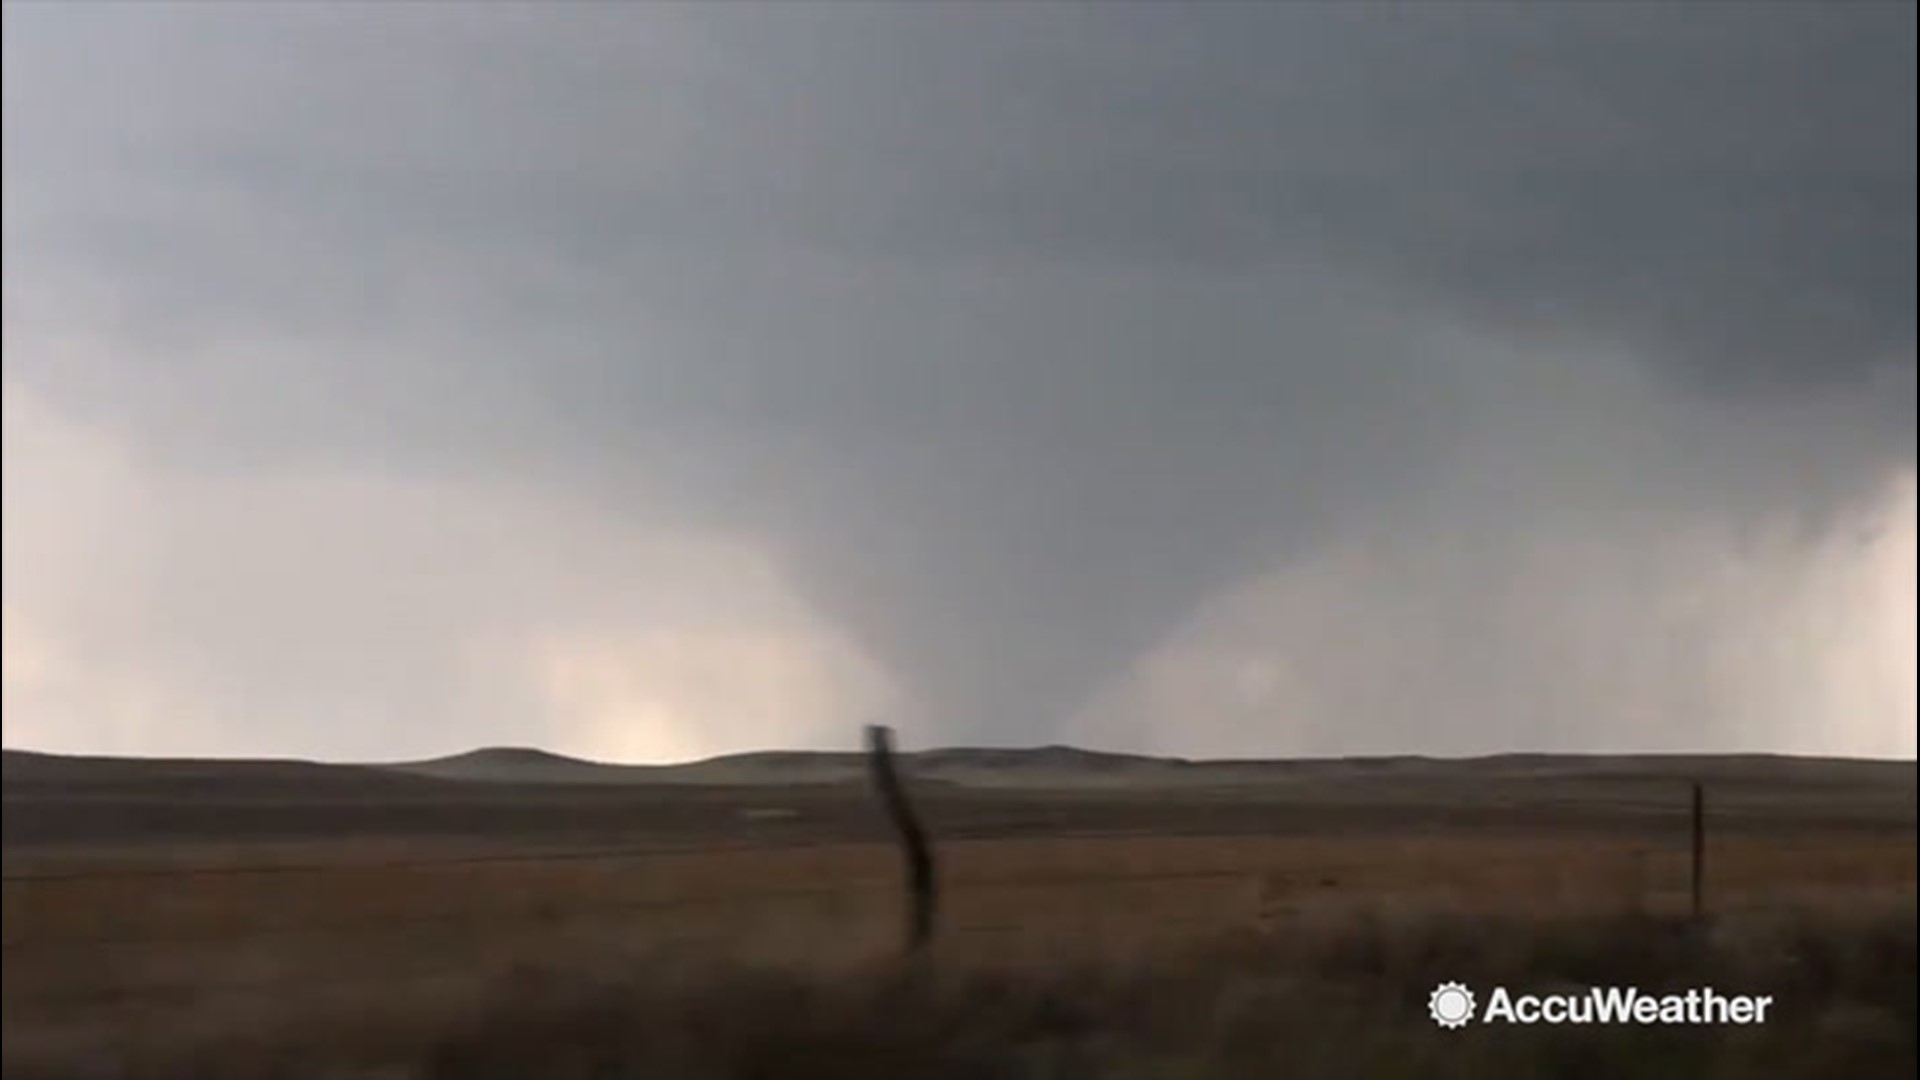 AccuWeather's Reed Timmer came into contact with a 'massive' wedge tornado in Jay Em, Wyoming, on Sept. 10.